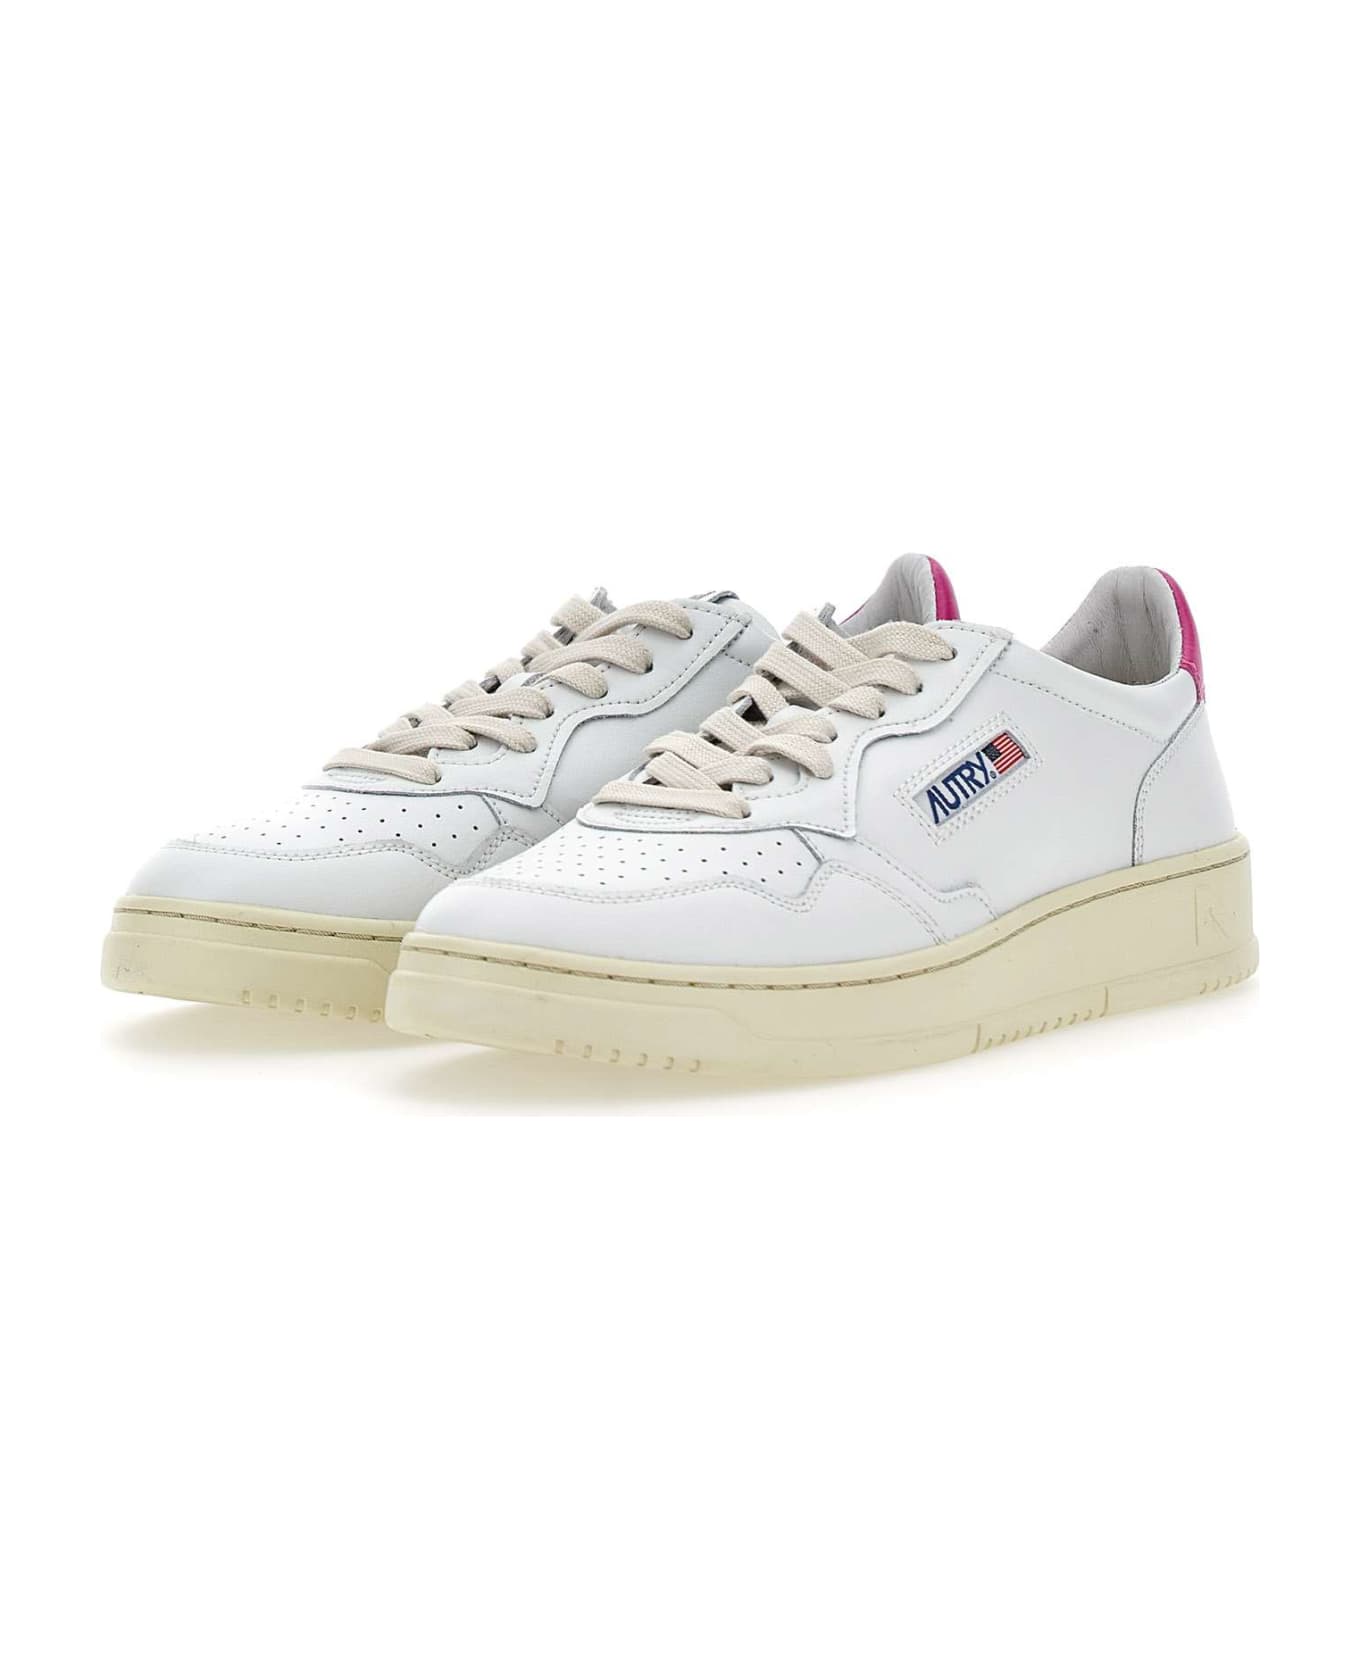 Autry 'll42' Leather Sneakers - WHITE/FUCHSIA スニーカー